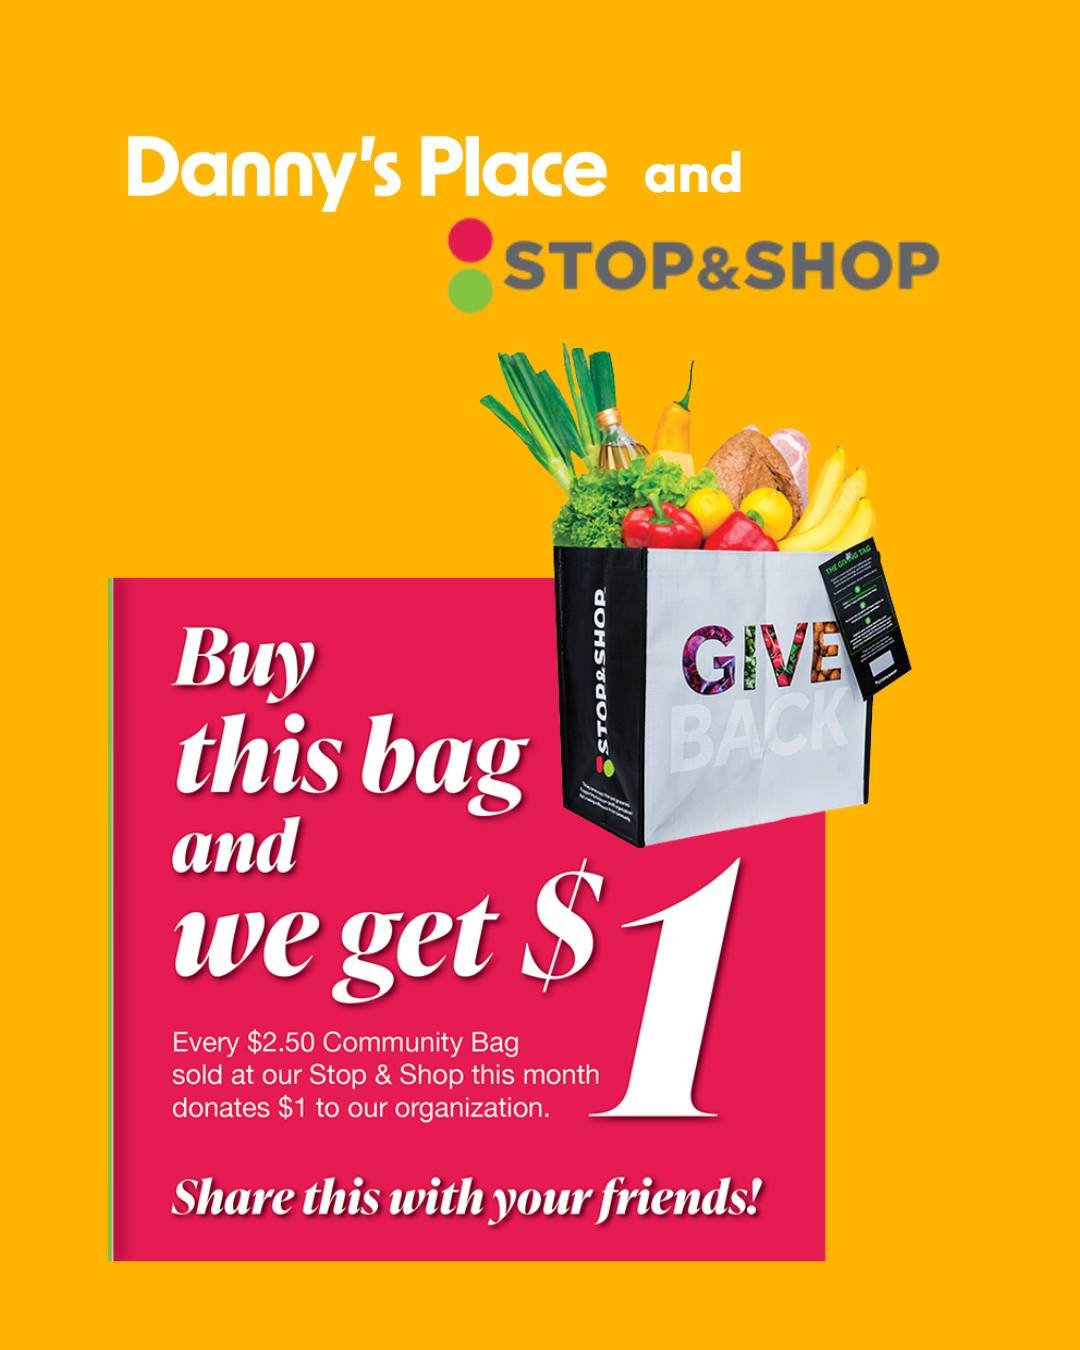 For every $2.50 Community Bag sold at Stop &amp; Shop in May, they will donate $1 to Danny's Place! 

Next time you are at Stop&amp;Shop, think about us! 🐧